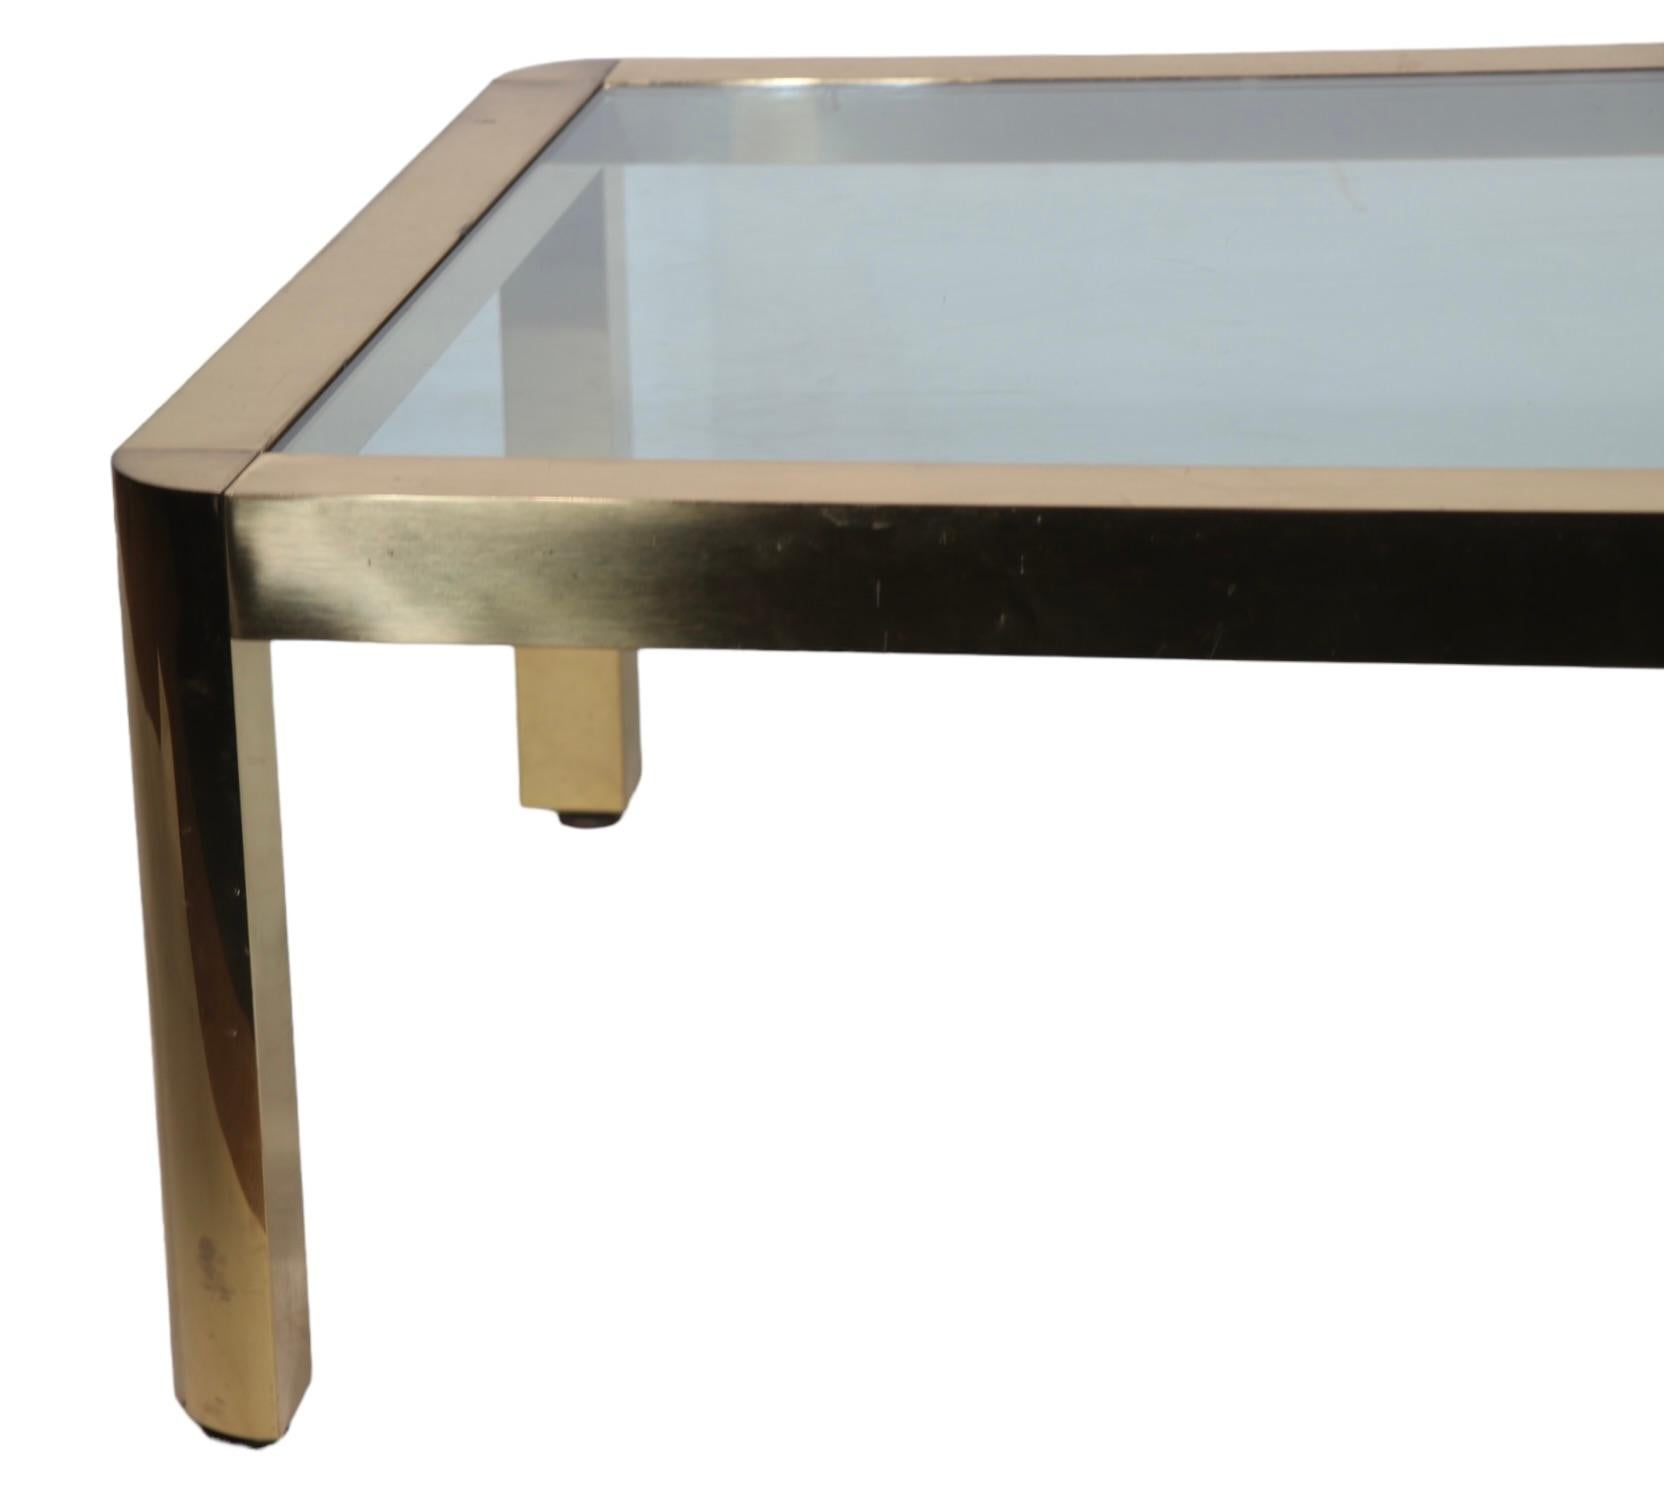 Postmodern Hollywood Regency Brass and Glass Coffee Table Made in Italy c 1970's In Good Condition For Sale In New York, NY